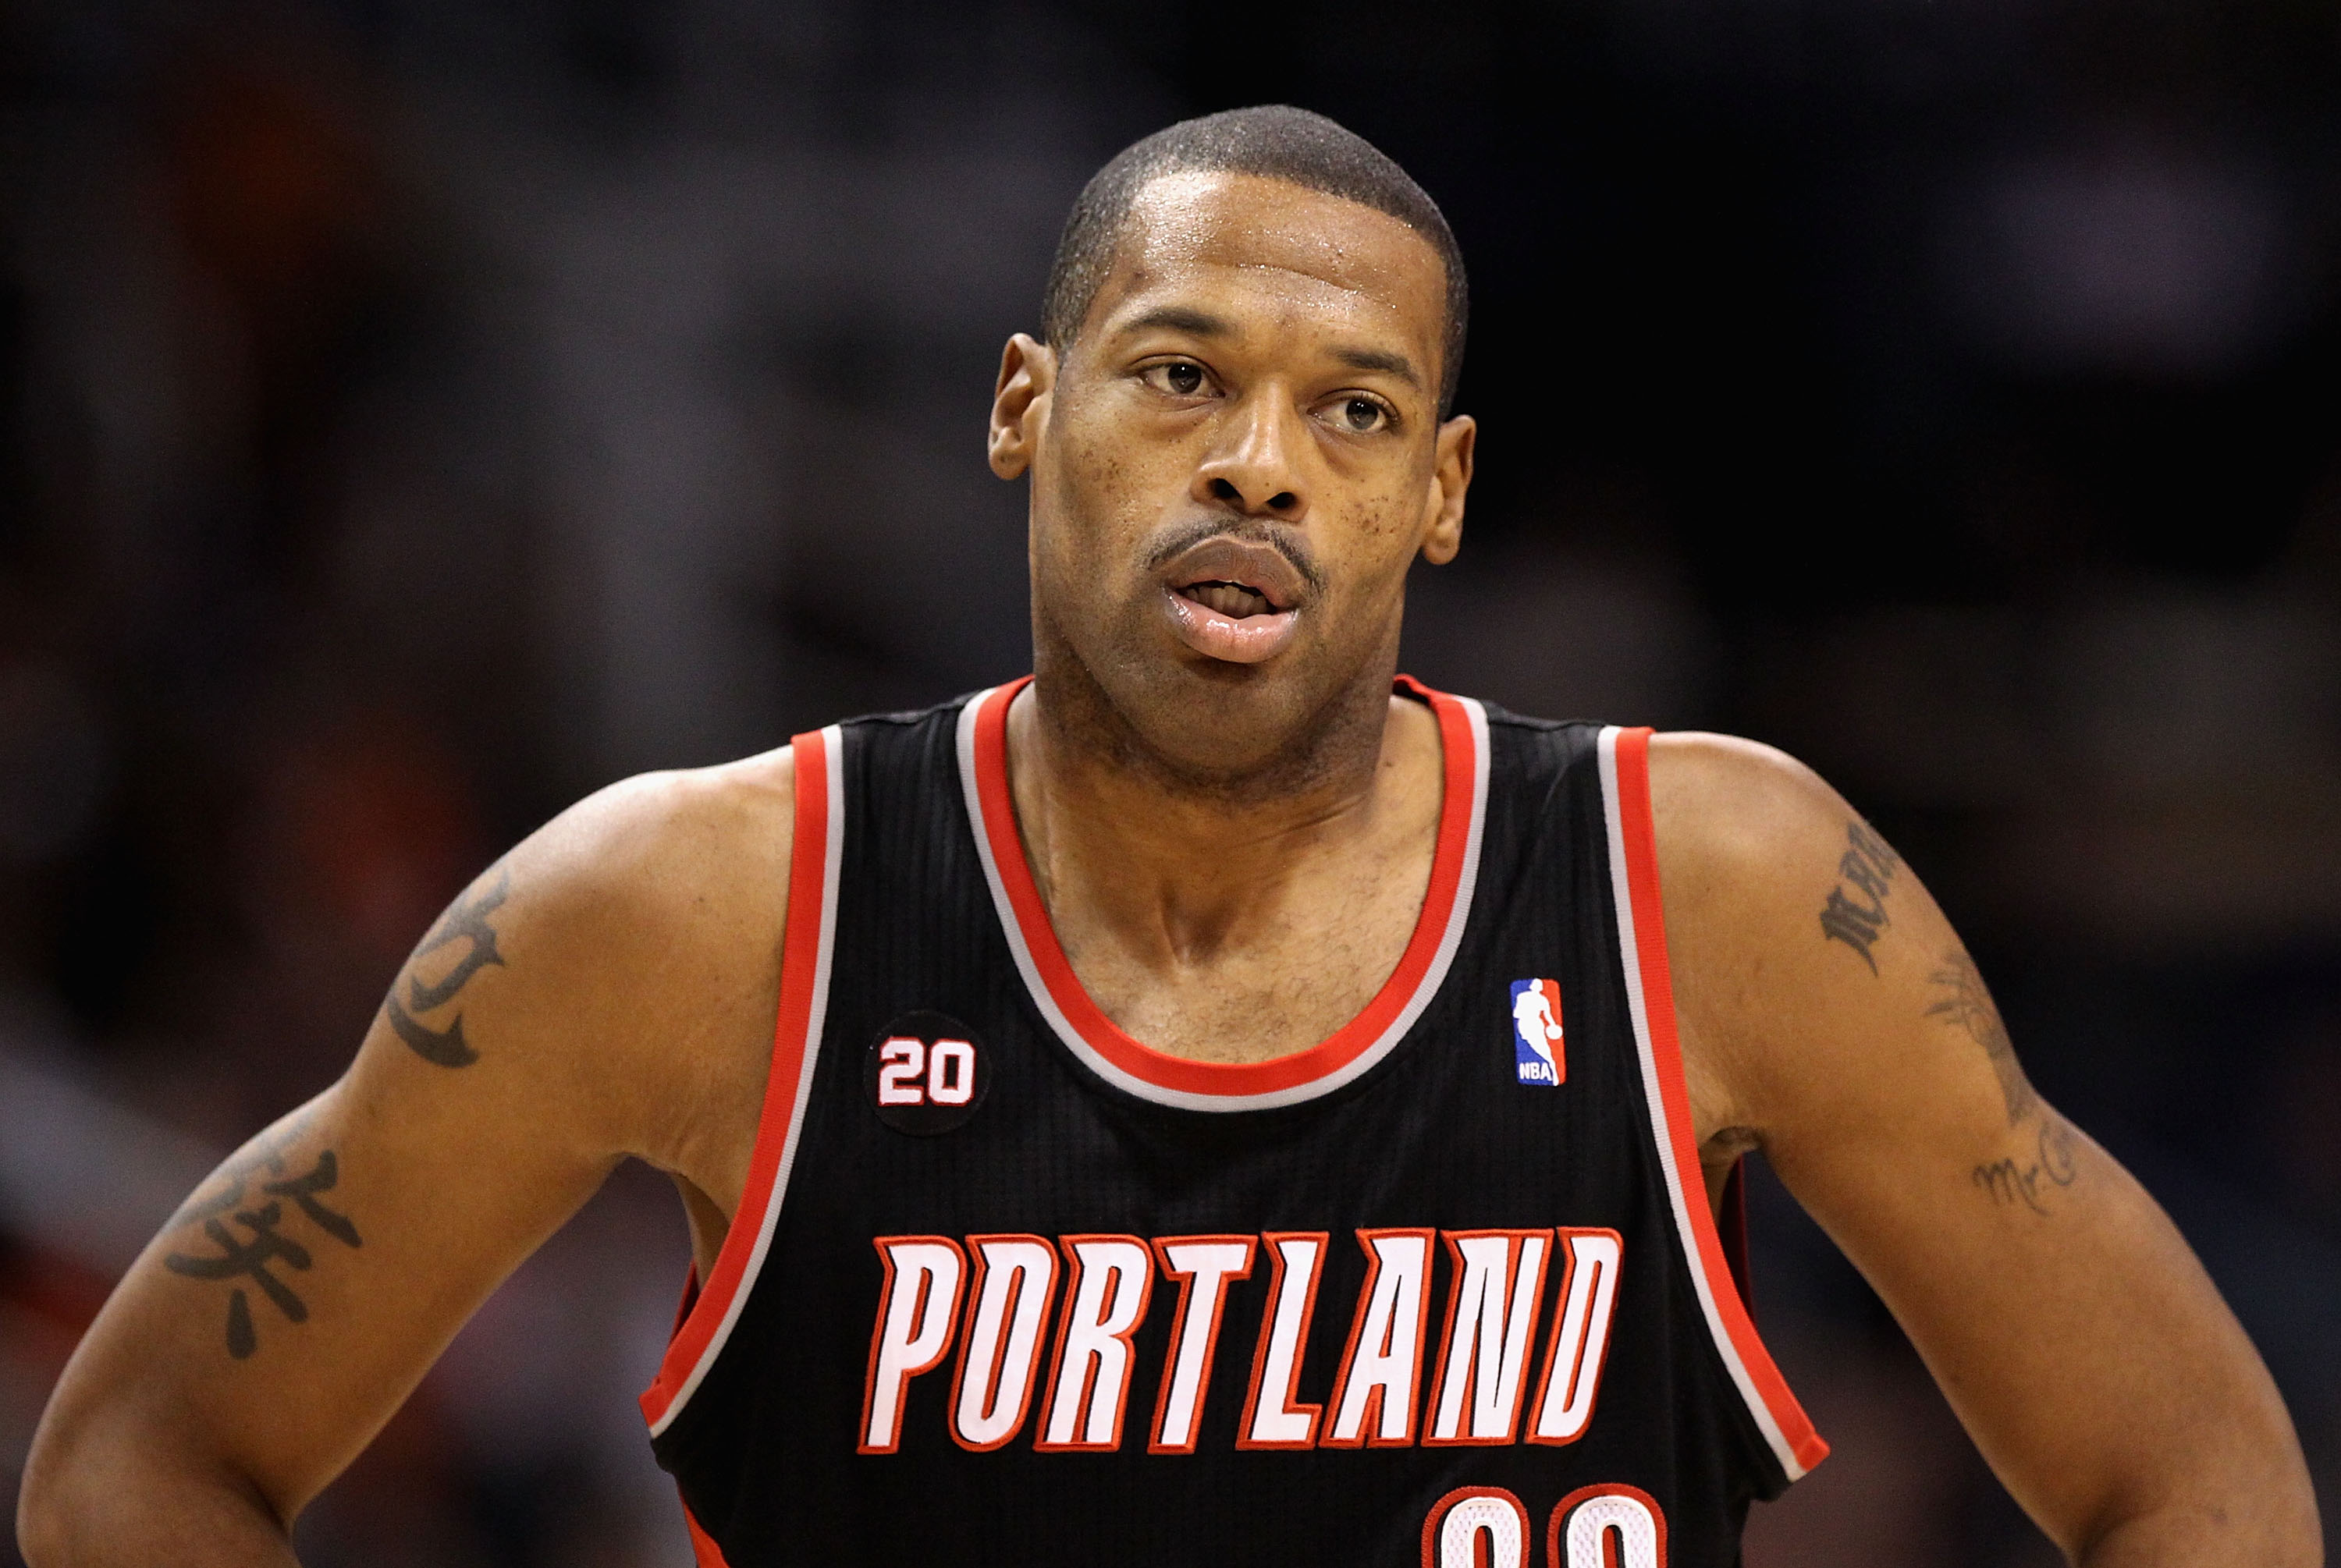 Denver Nuggets A to Z: Marcus Camby